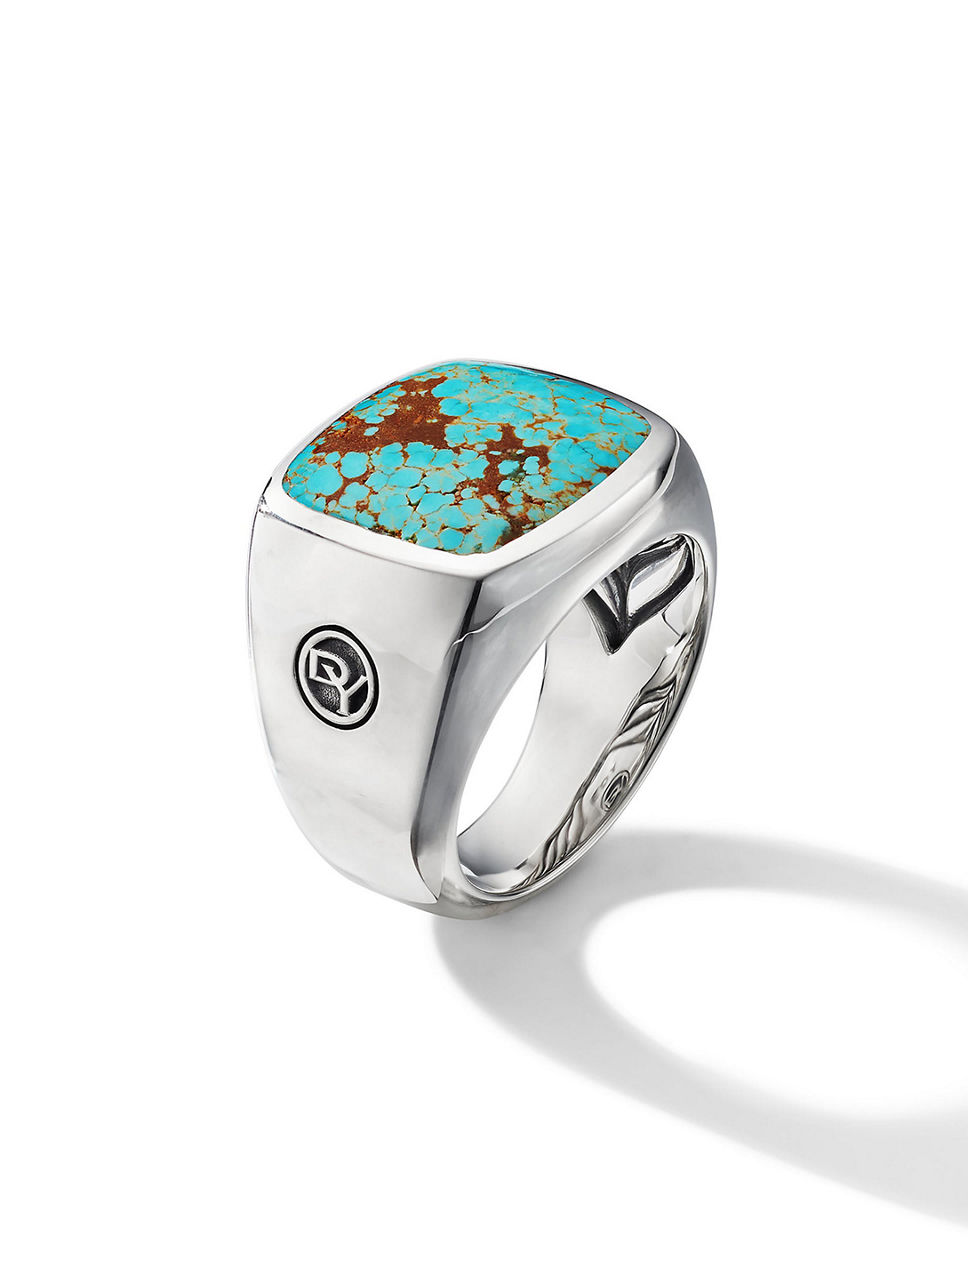 Exotic Stone Signet Ring Sterling Silver With Turquoise